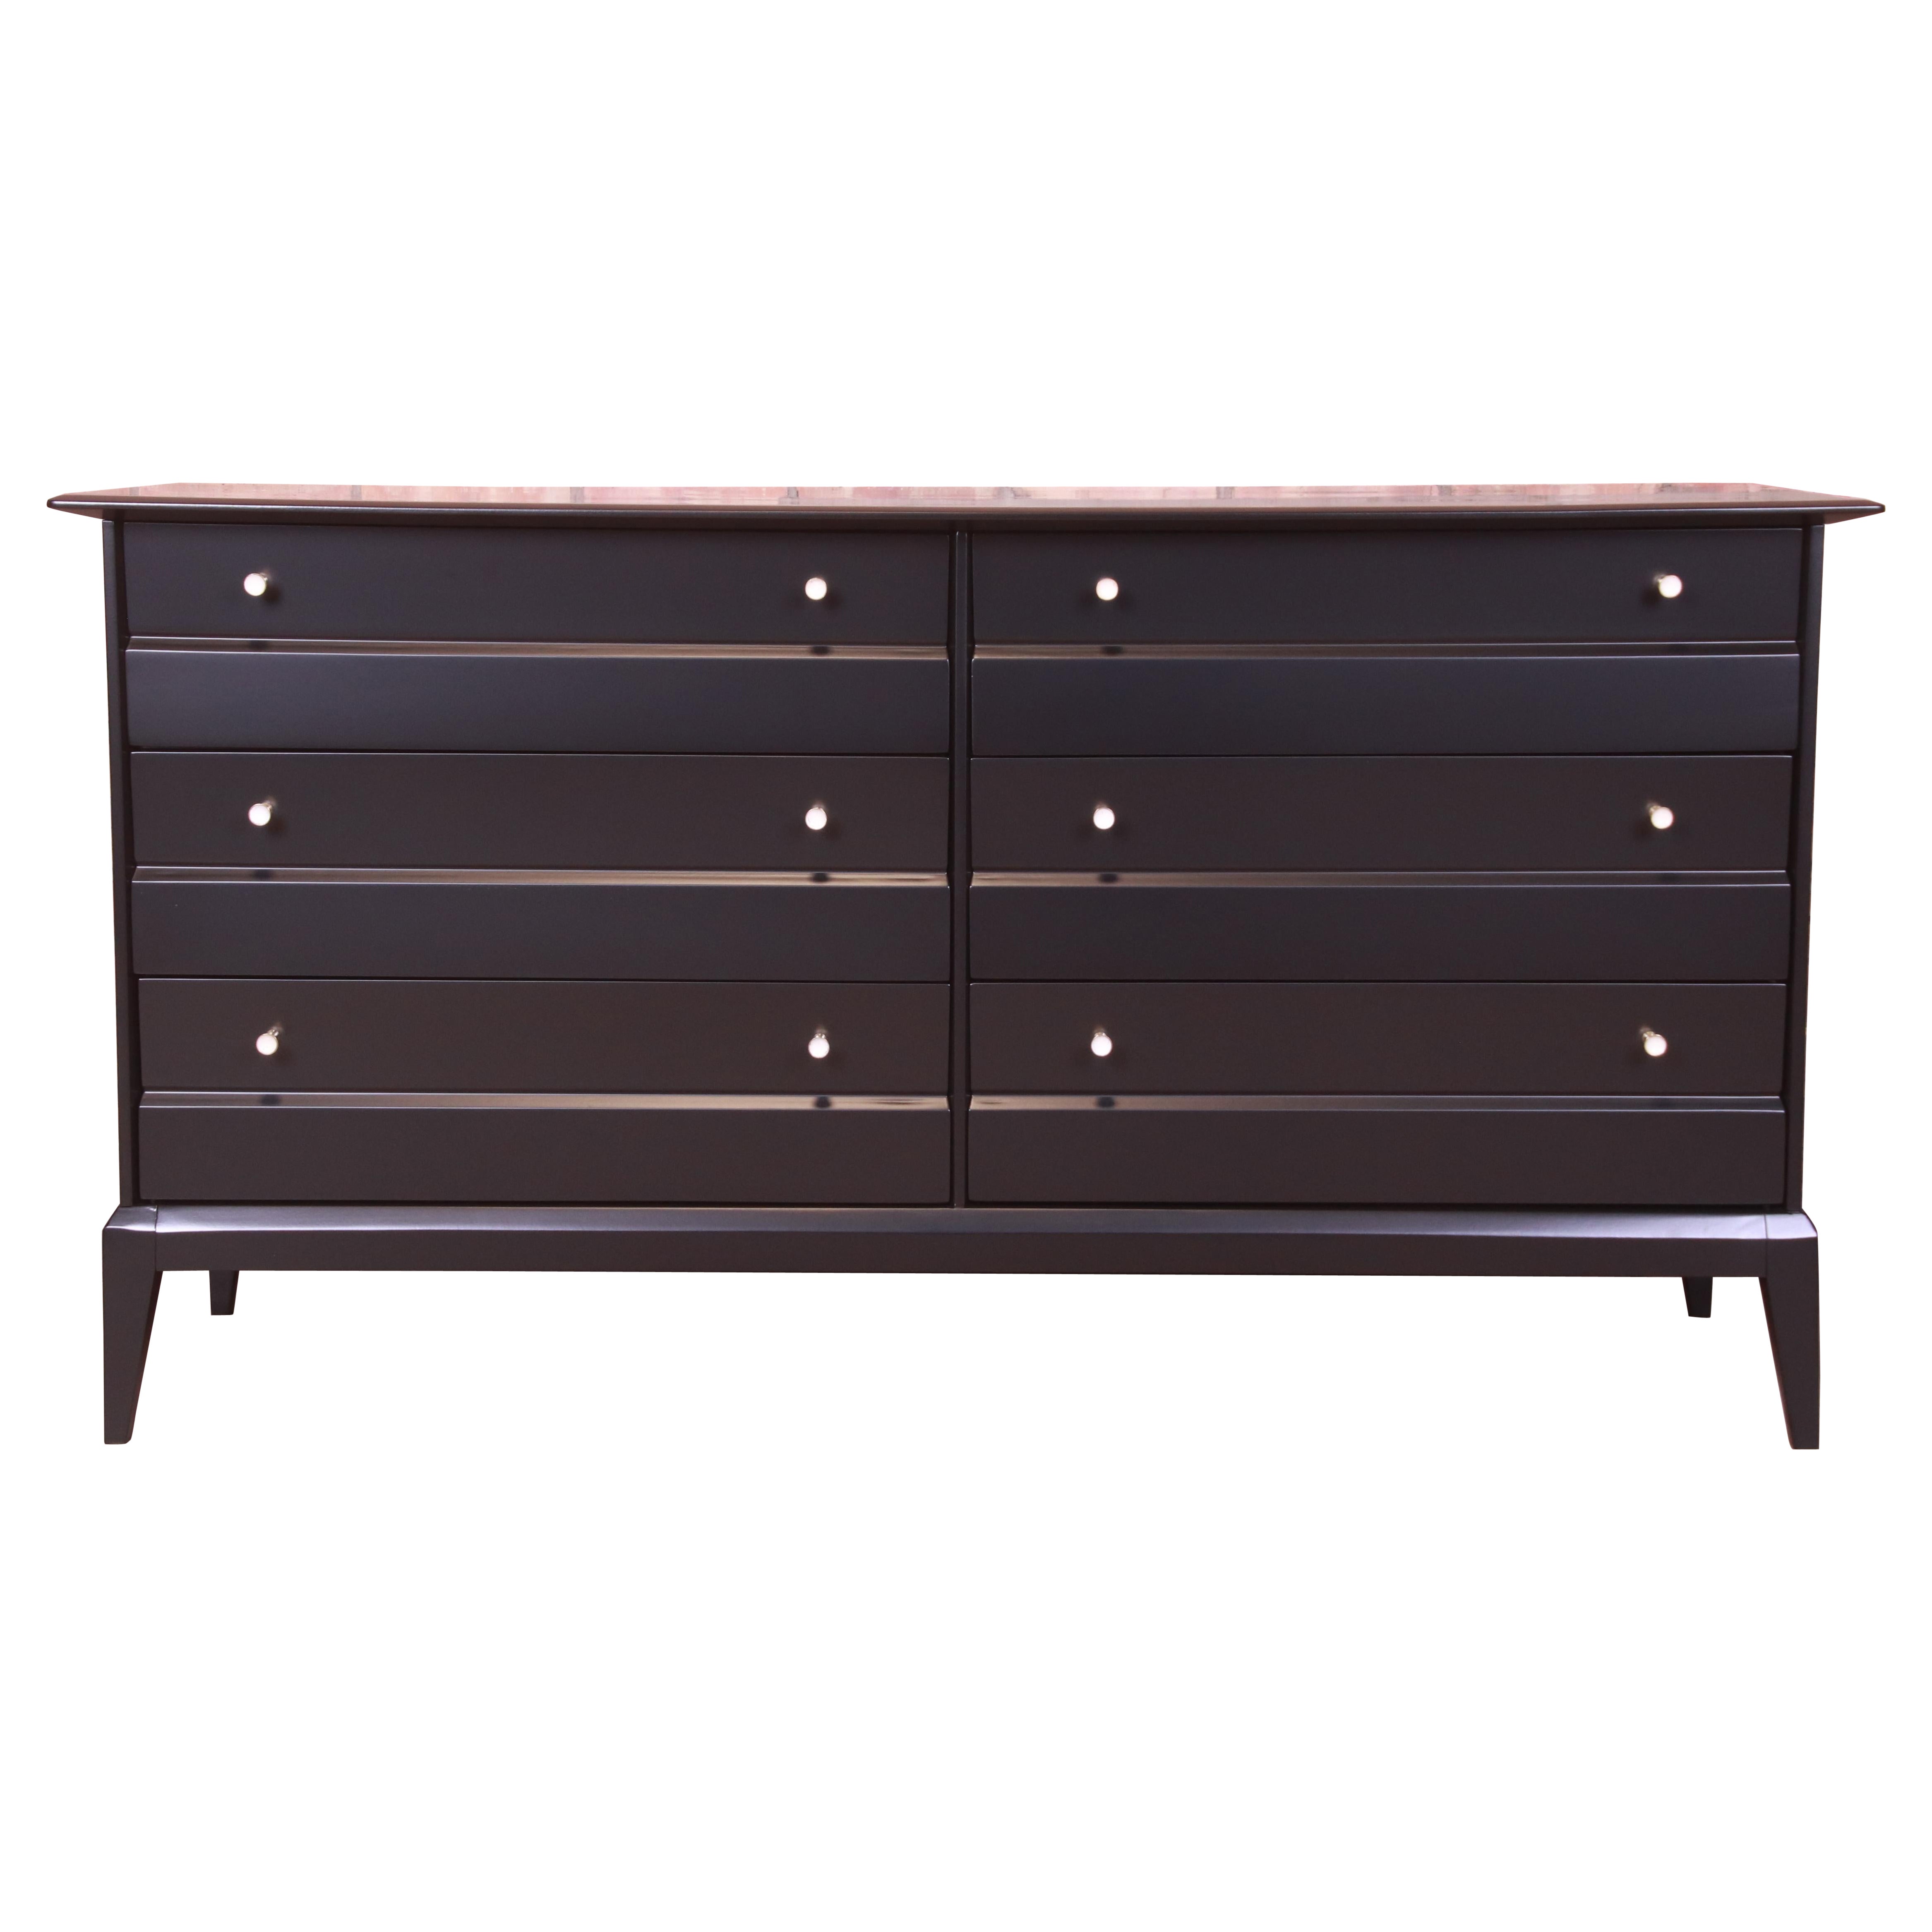 Paul McCobb Style Black Lacquered Dresser by Heywood Wakefield, Newly Refinished